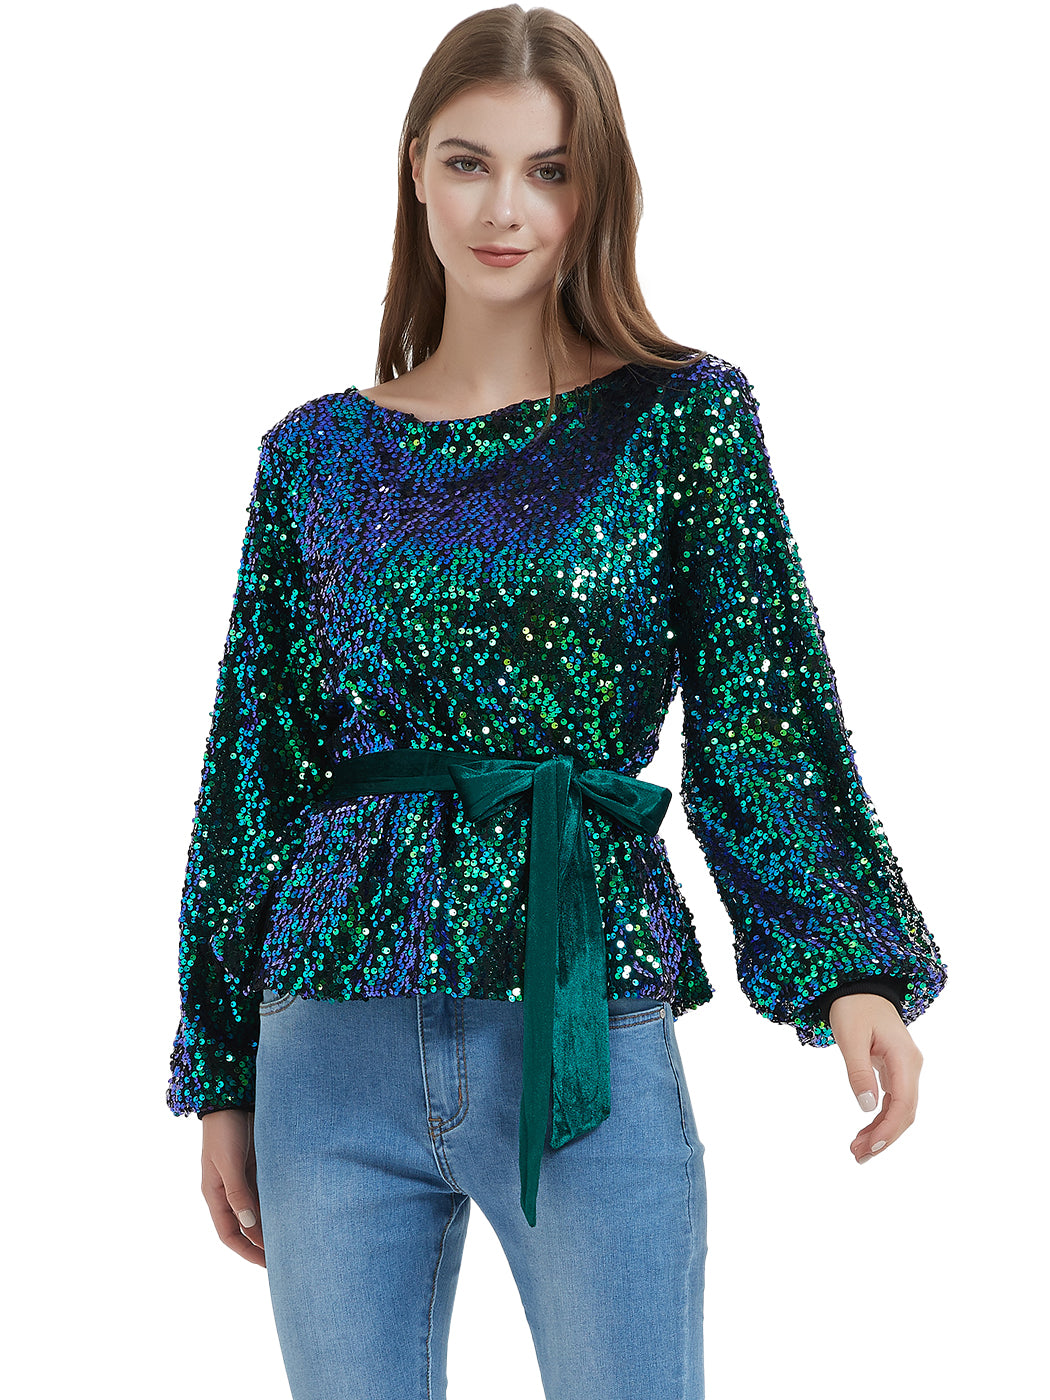 Anna-Kaci Womens Long Sleeve Sequin Top Sparkly Party Pullover Sweatshirt